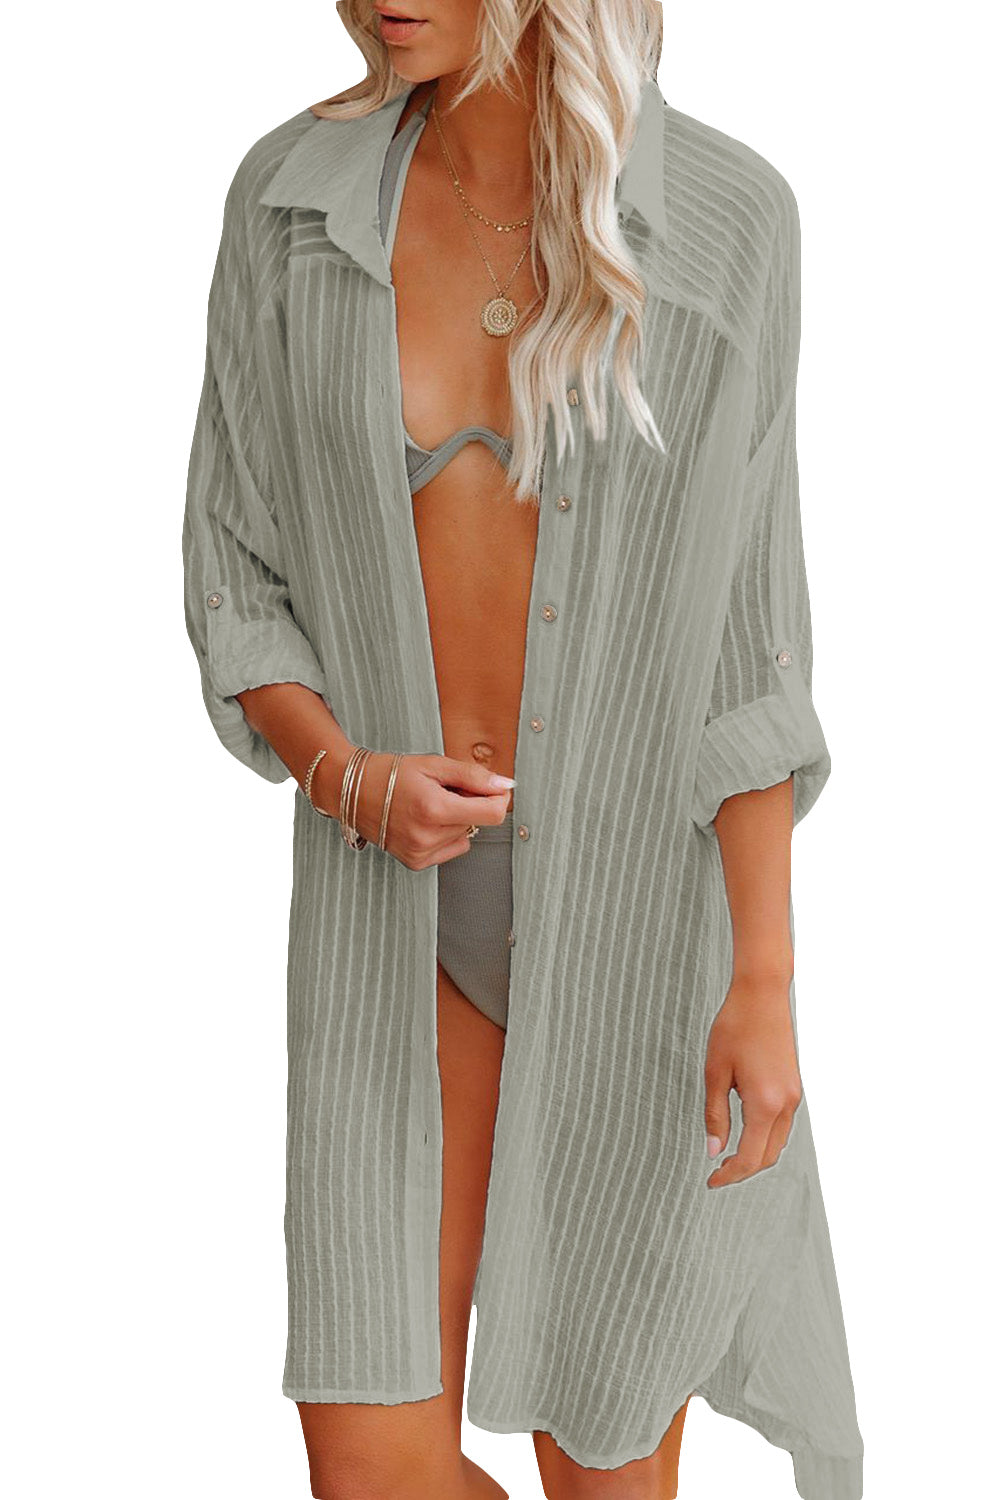 LC42994-9-S, LC42994-9-M, LC42994-9-L, LC42994-9-XL, Green Casual Long Sleeve Striped Shirt Dress Beach Swimsuit Cover Ups with Belt